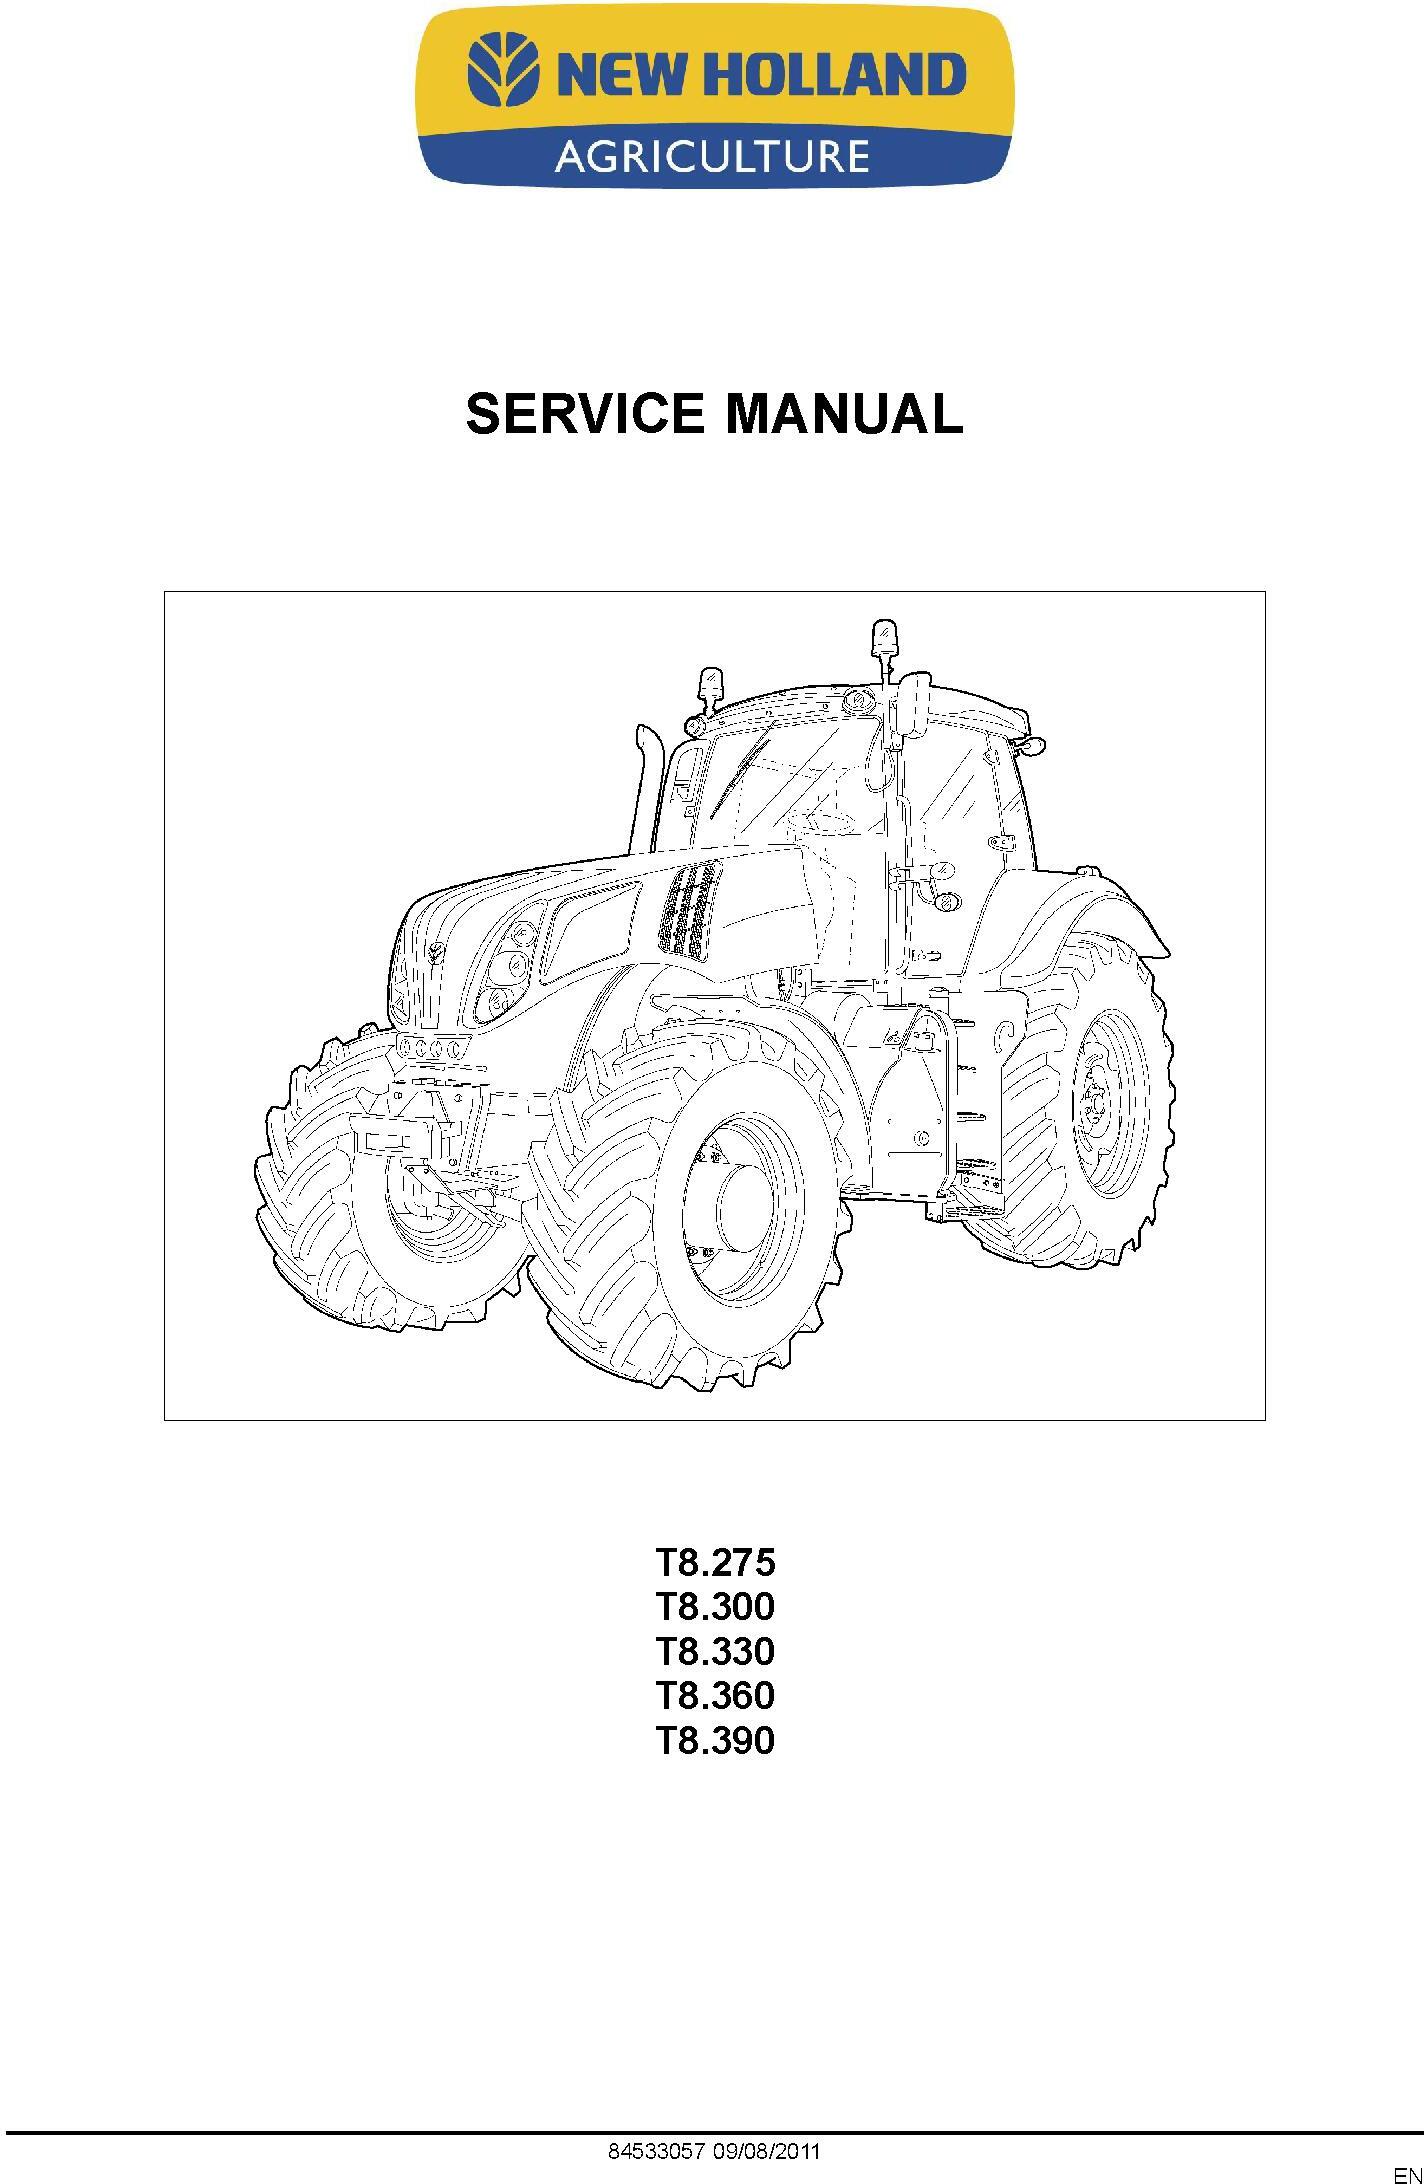 New Holland T8.275, T8.300, T8.330, T8.360, T8.390 Agricultural Tractor Service Manual (08/2011) - 19578